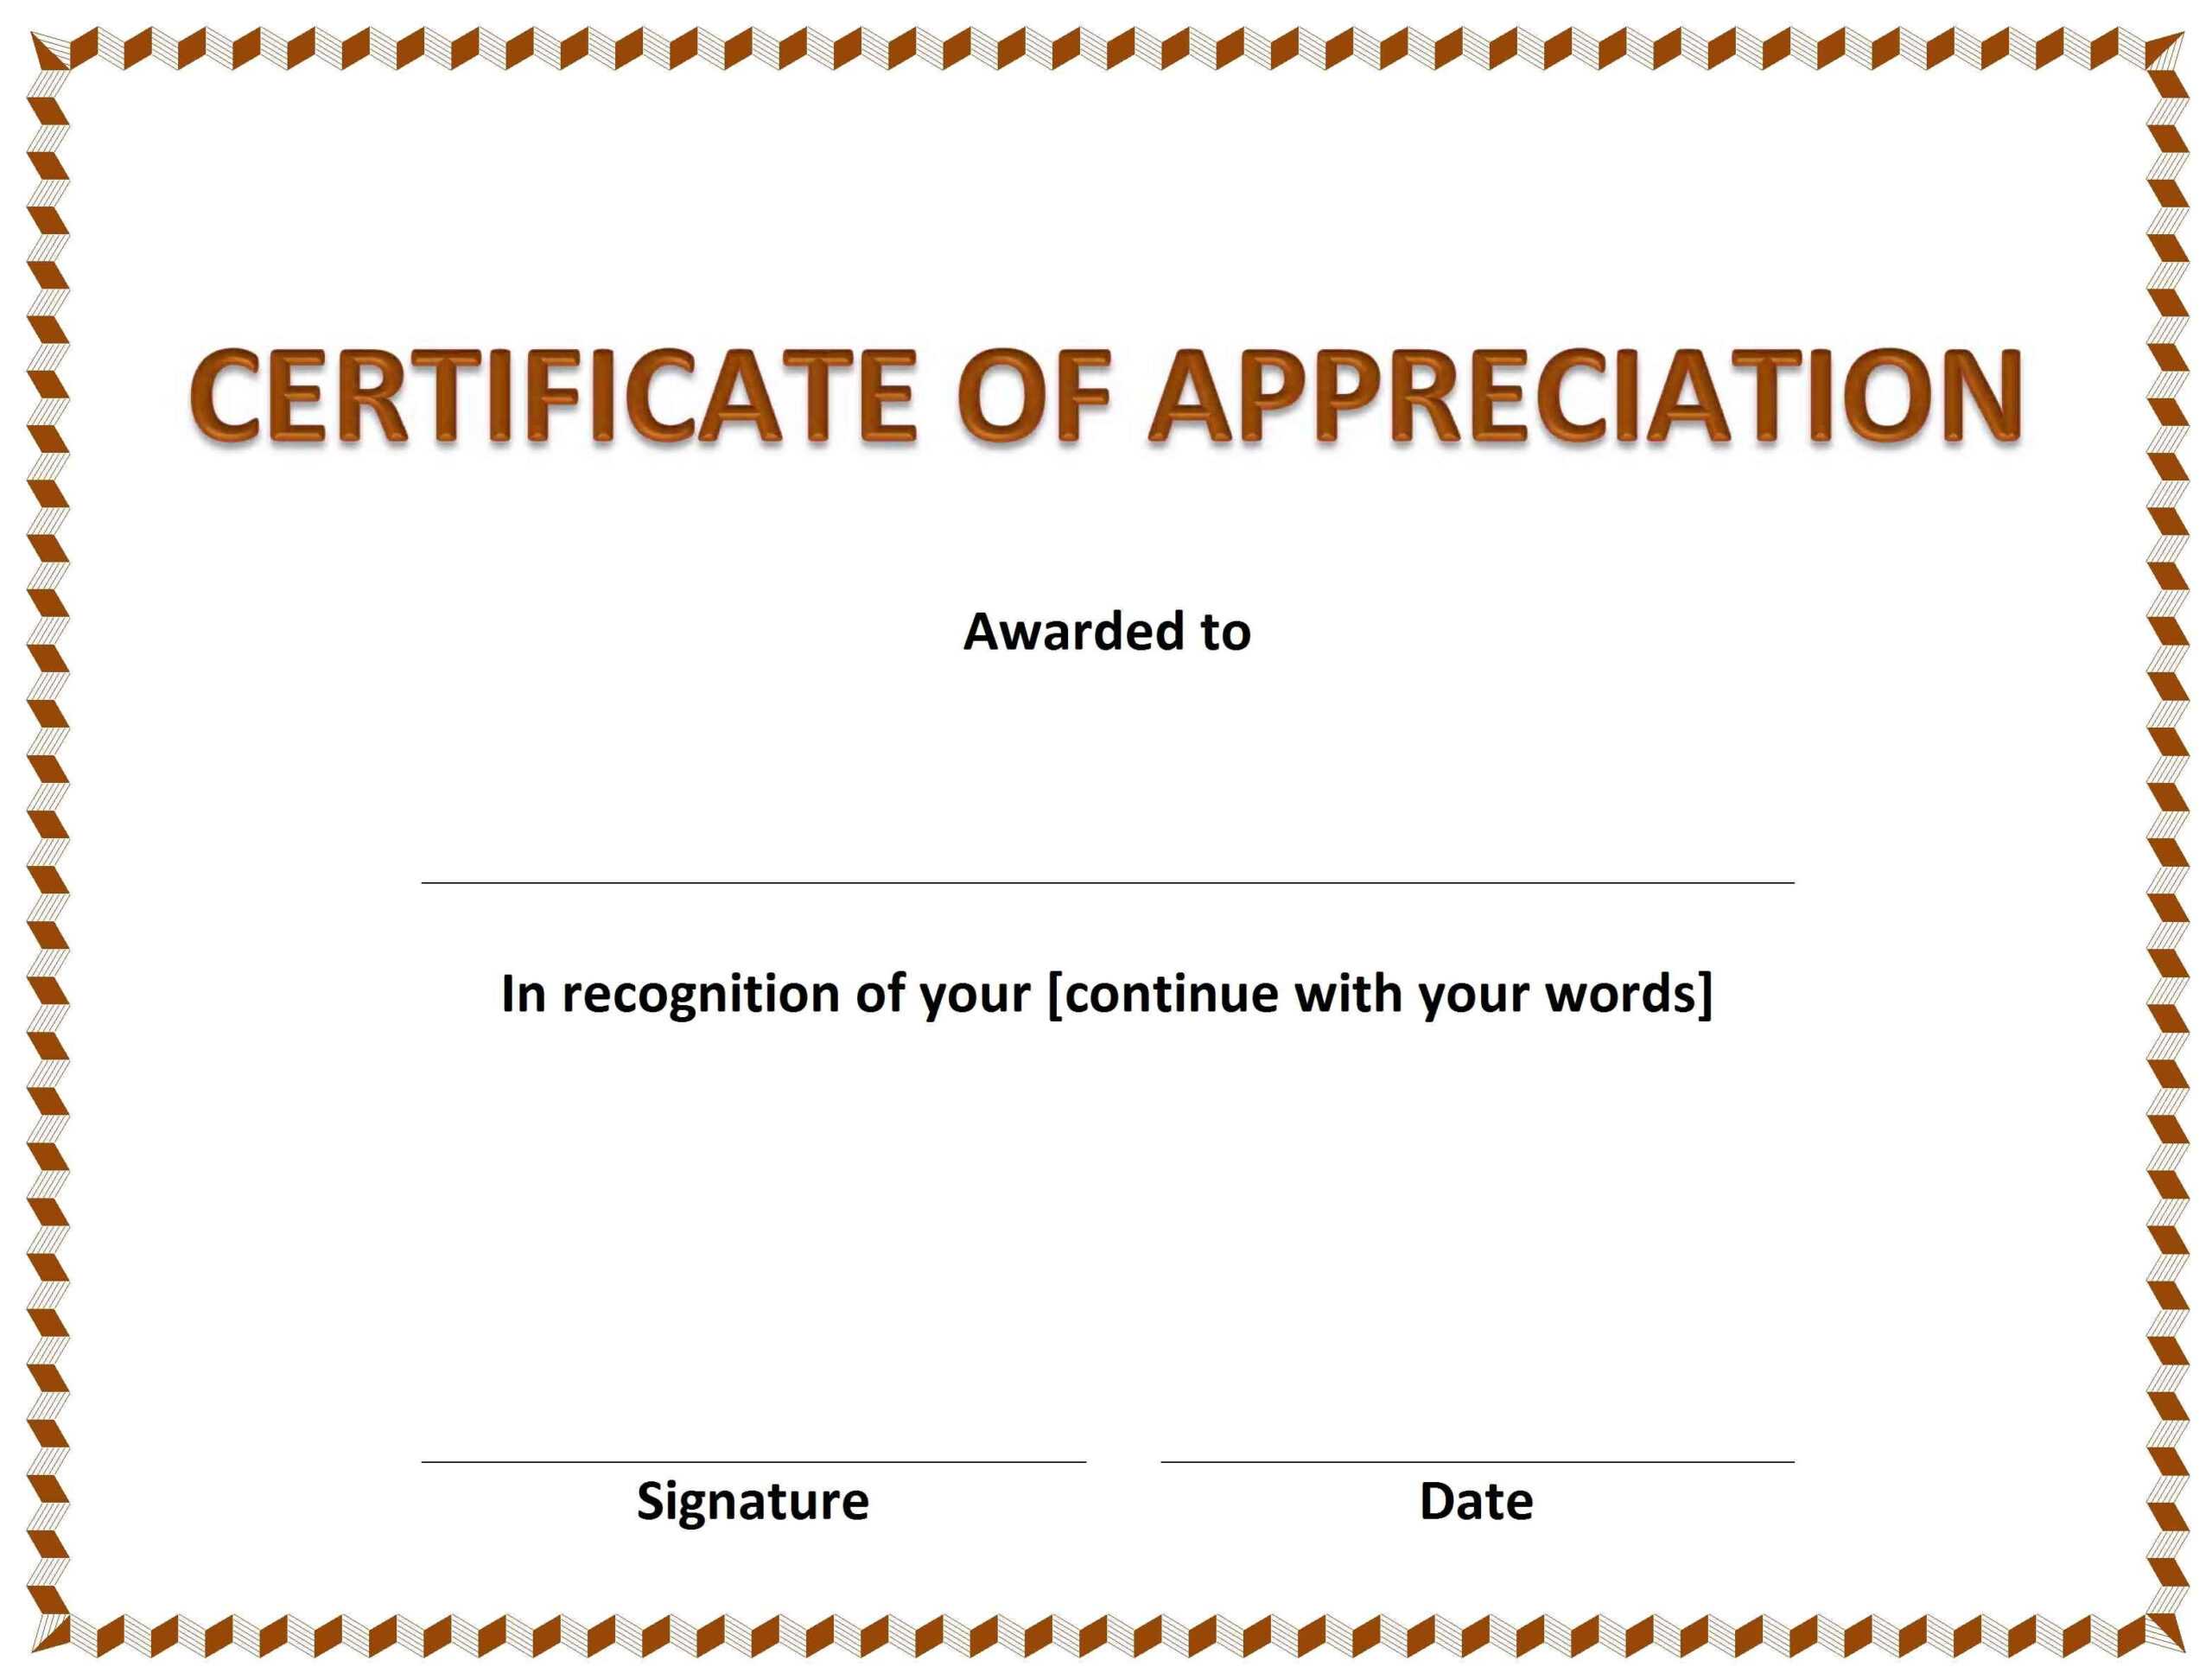 Certificate Of Appreciation » Officetemplates Within Template For Certificate Of Appreciation In Microsoft Word